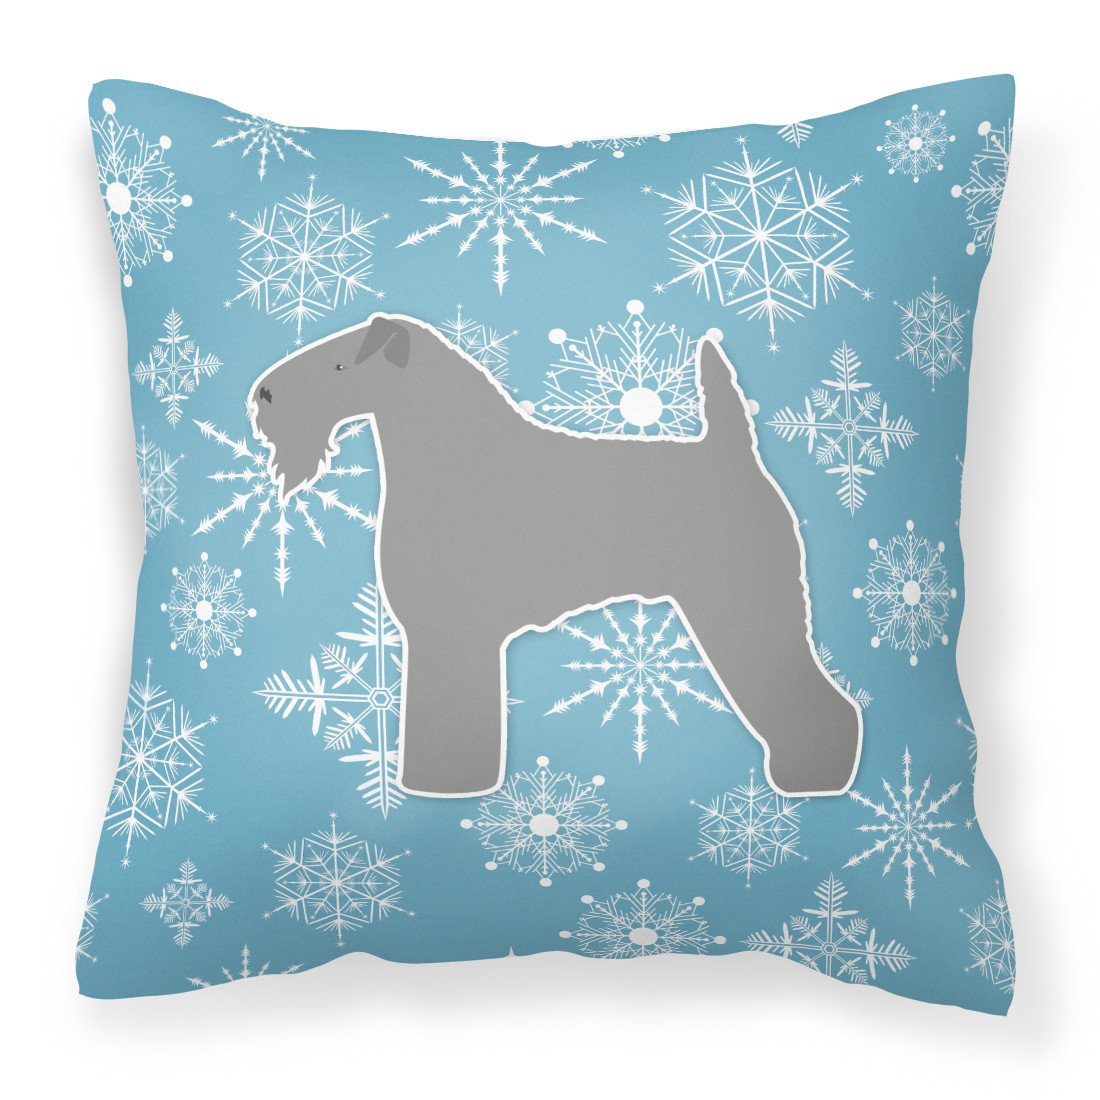 Winter Snowflake Kerry Blue Terrier Fabric Decorative Pillow BB3492PW1818 by Caroline's Treasures